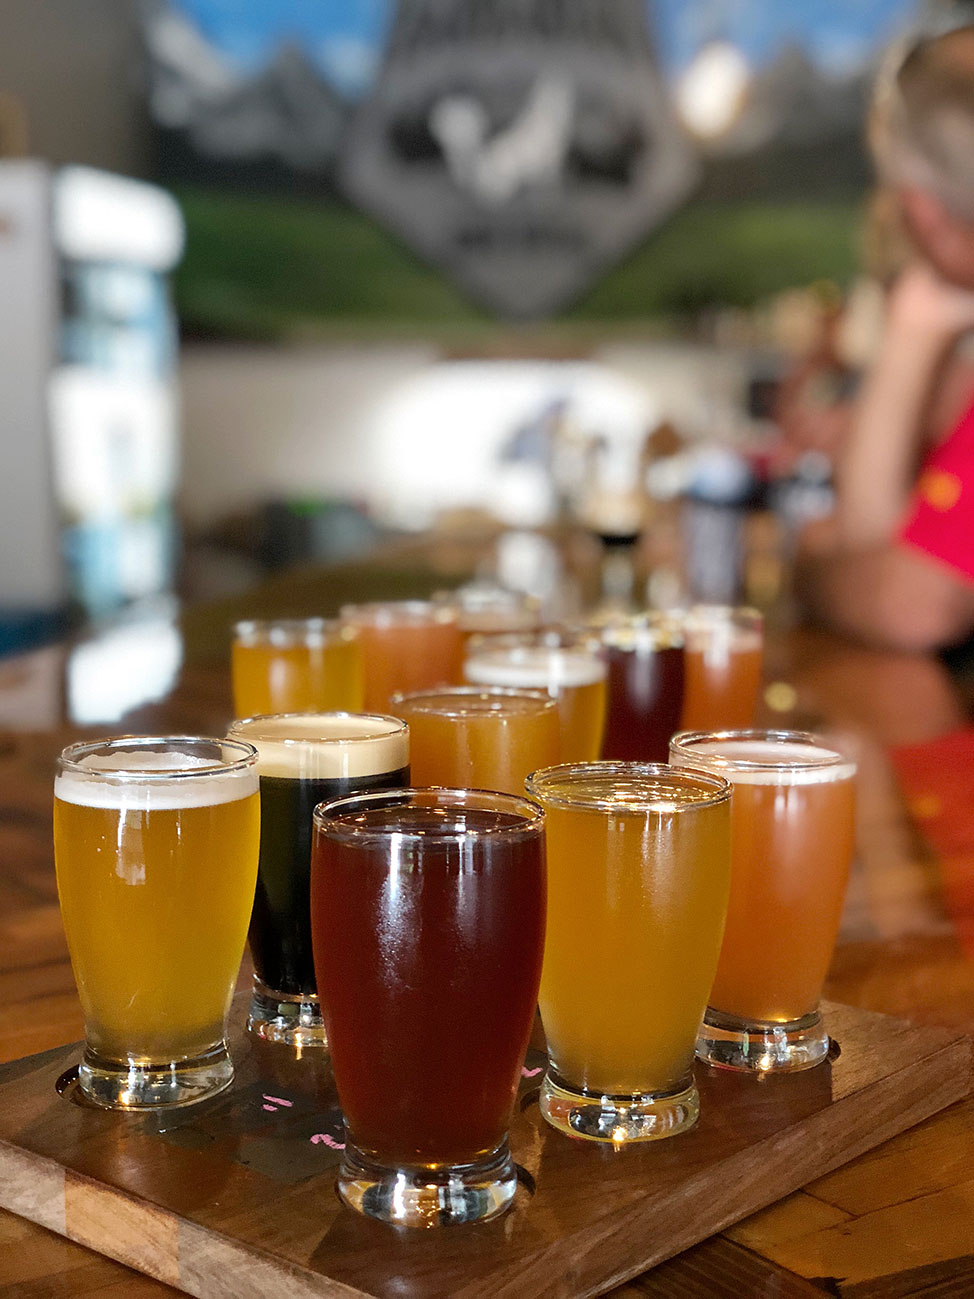 Where to Drink Beer in Boise